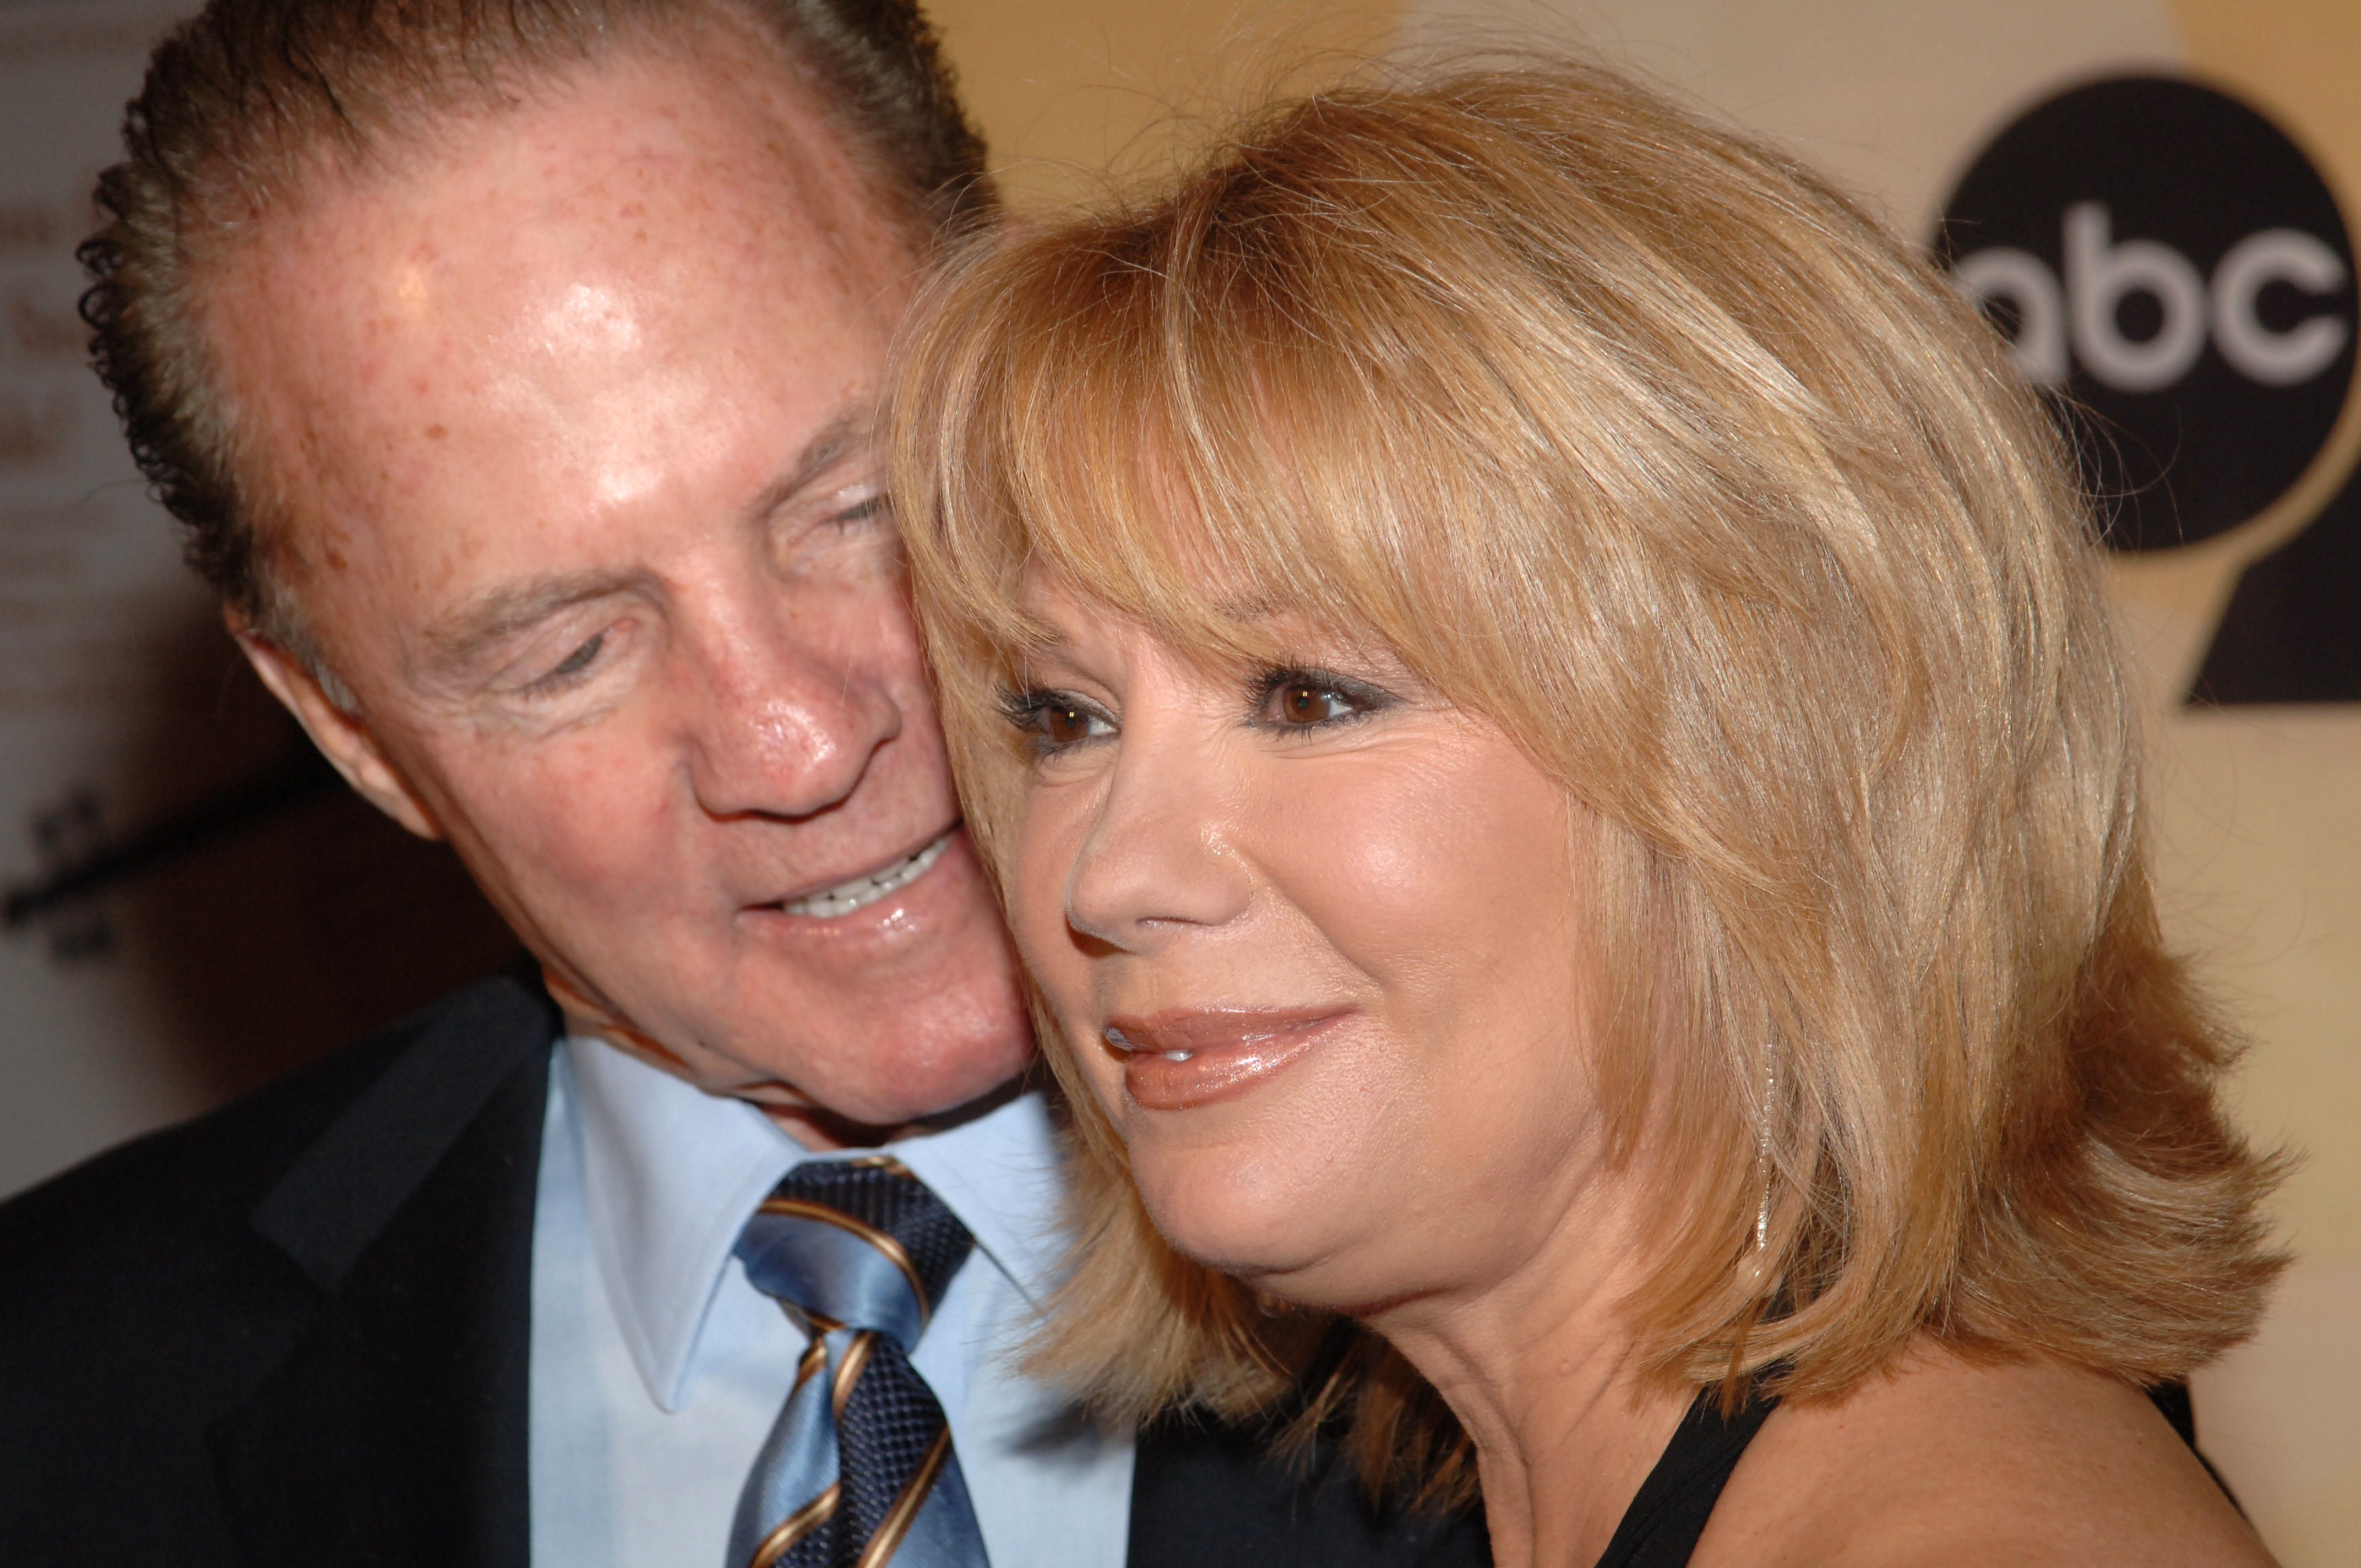 Kathie Lee and Frank Gifford at ABC's Good Morning America's 30th Anniversary Gala in 2005 | Source: Getty Images